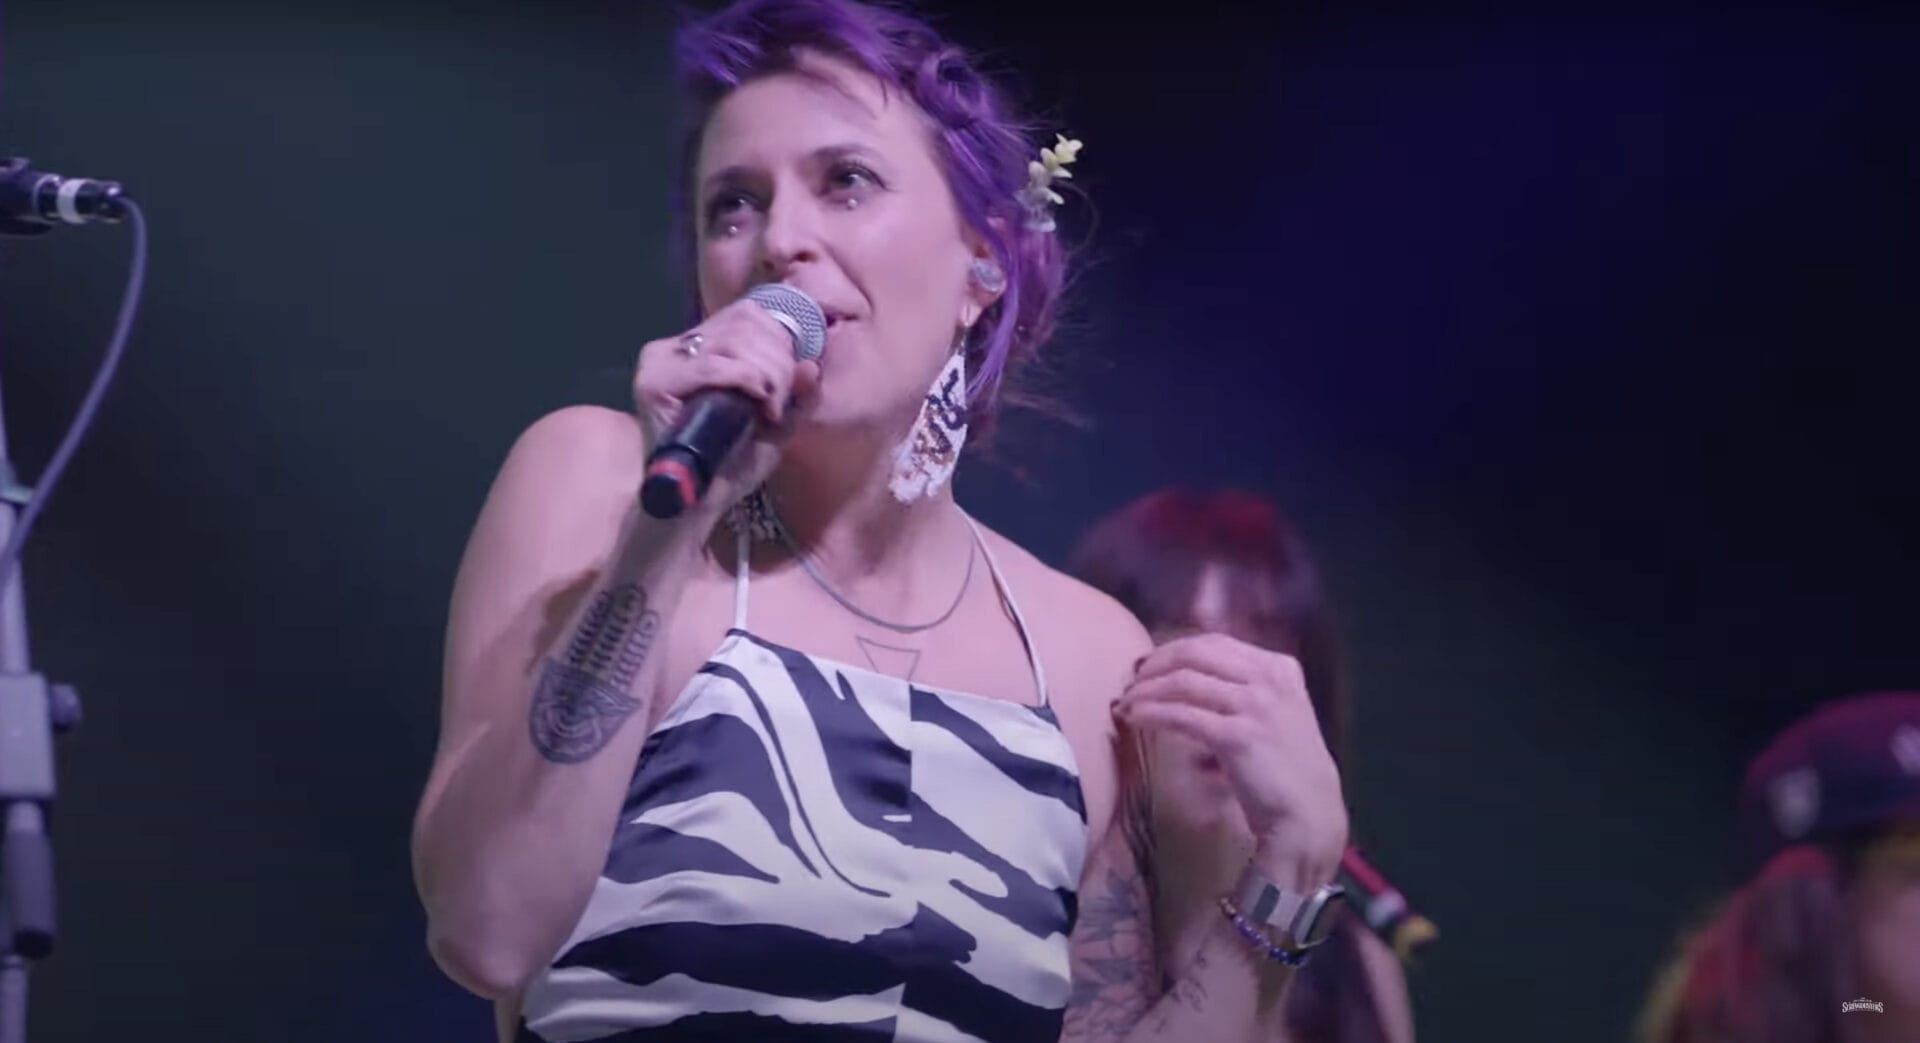 Watch: Lindsay Lou Joins The Infamous Stringdusters for “Respect” Cover in Denver